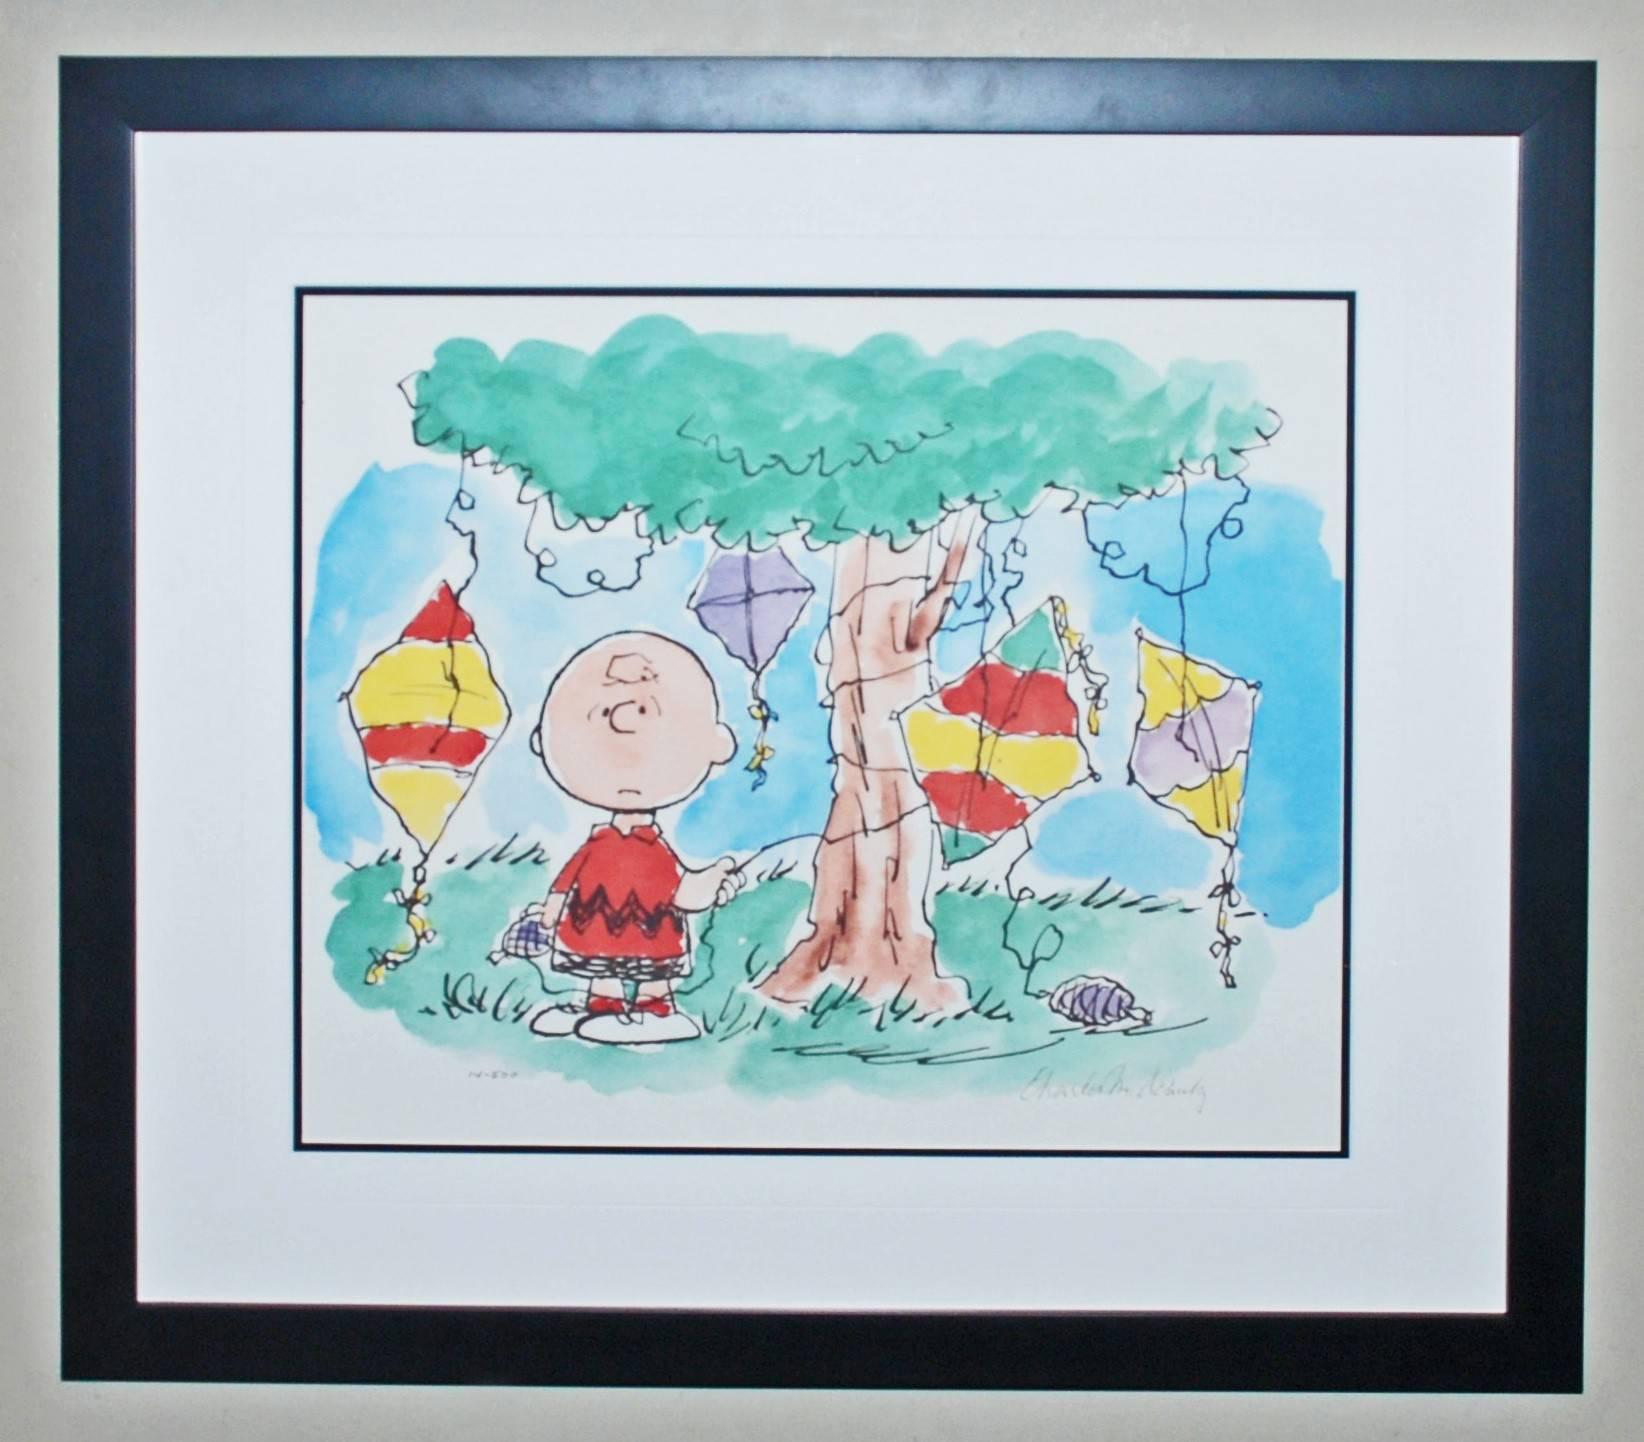 Good Grief - Print by Charles M. Schulz